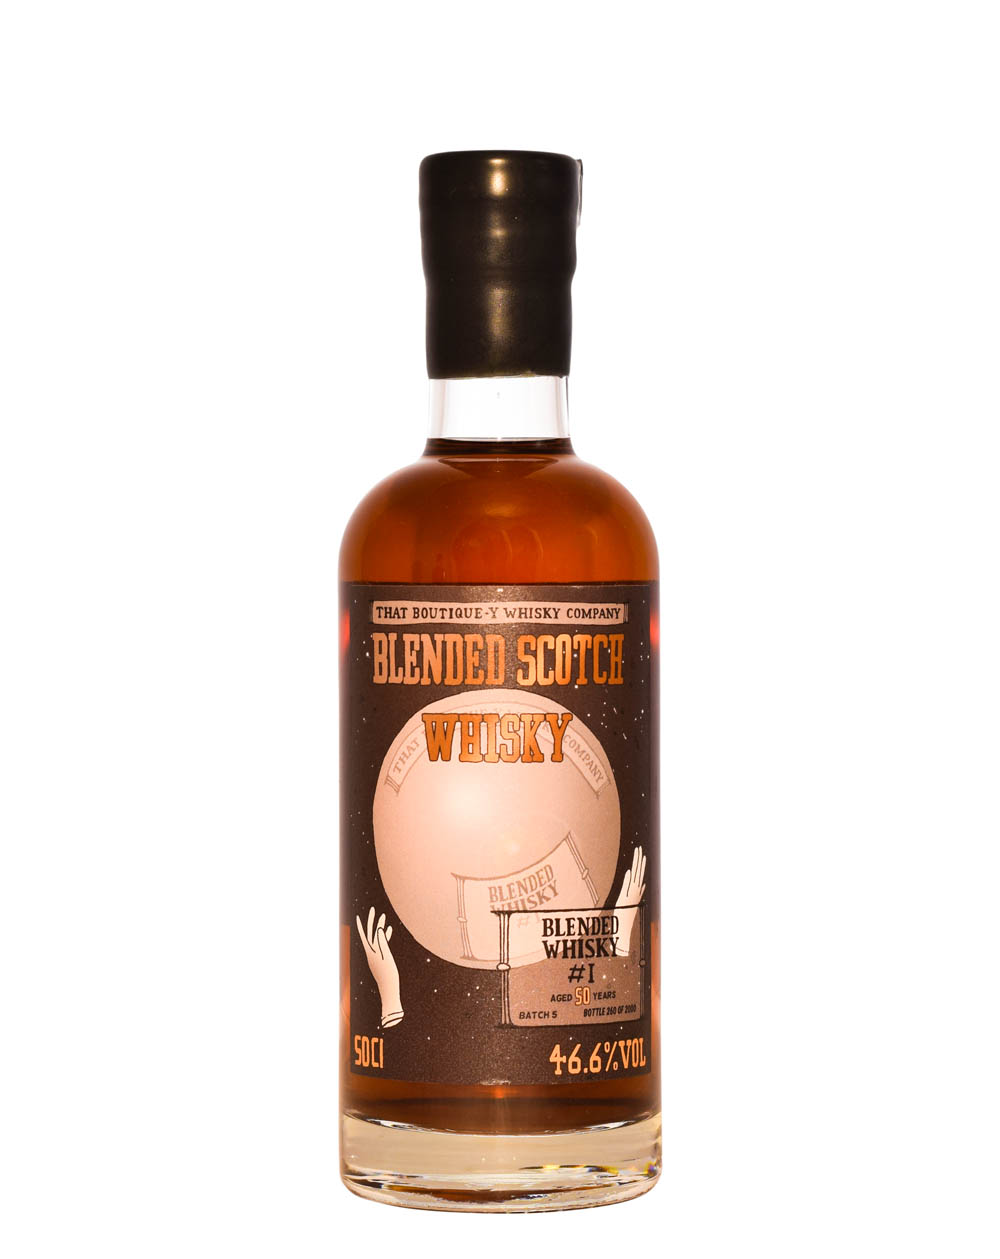 Blended Scotch Whisky TBWC Batch 5 (50 Years Old) - That Boutique-y Whisky Company Musthave Malts MHM